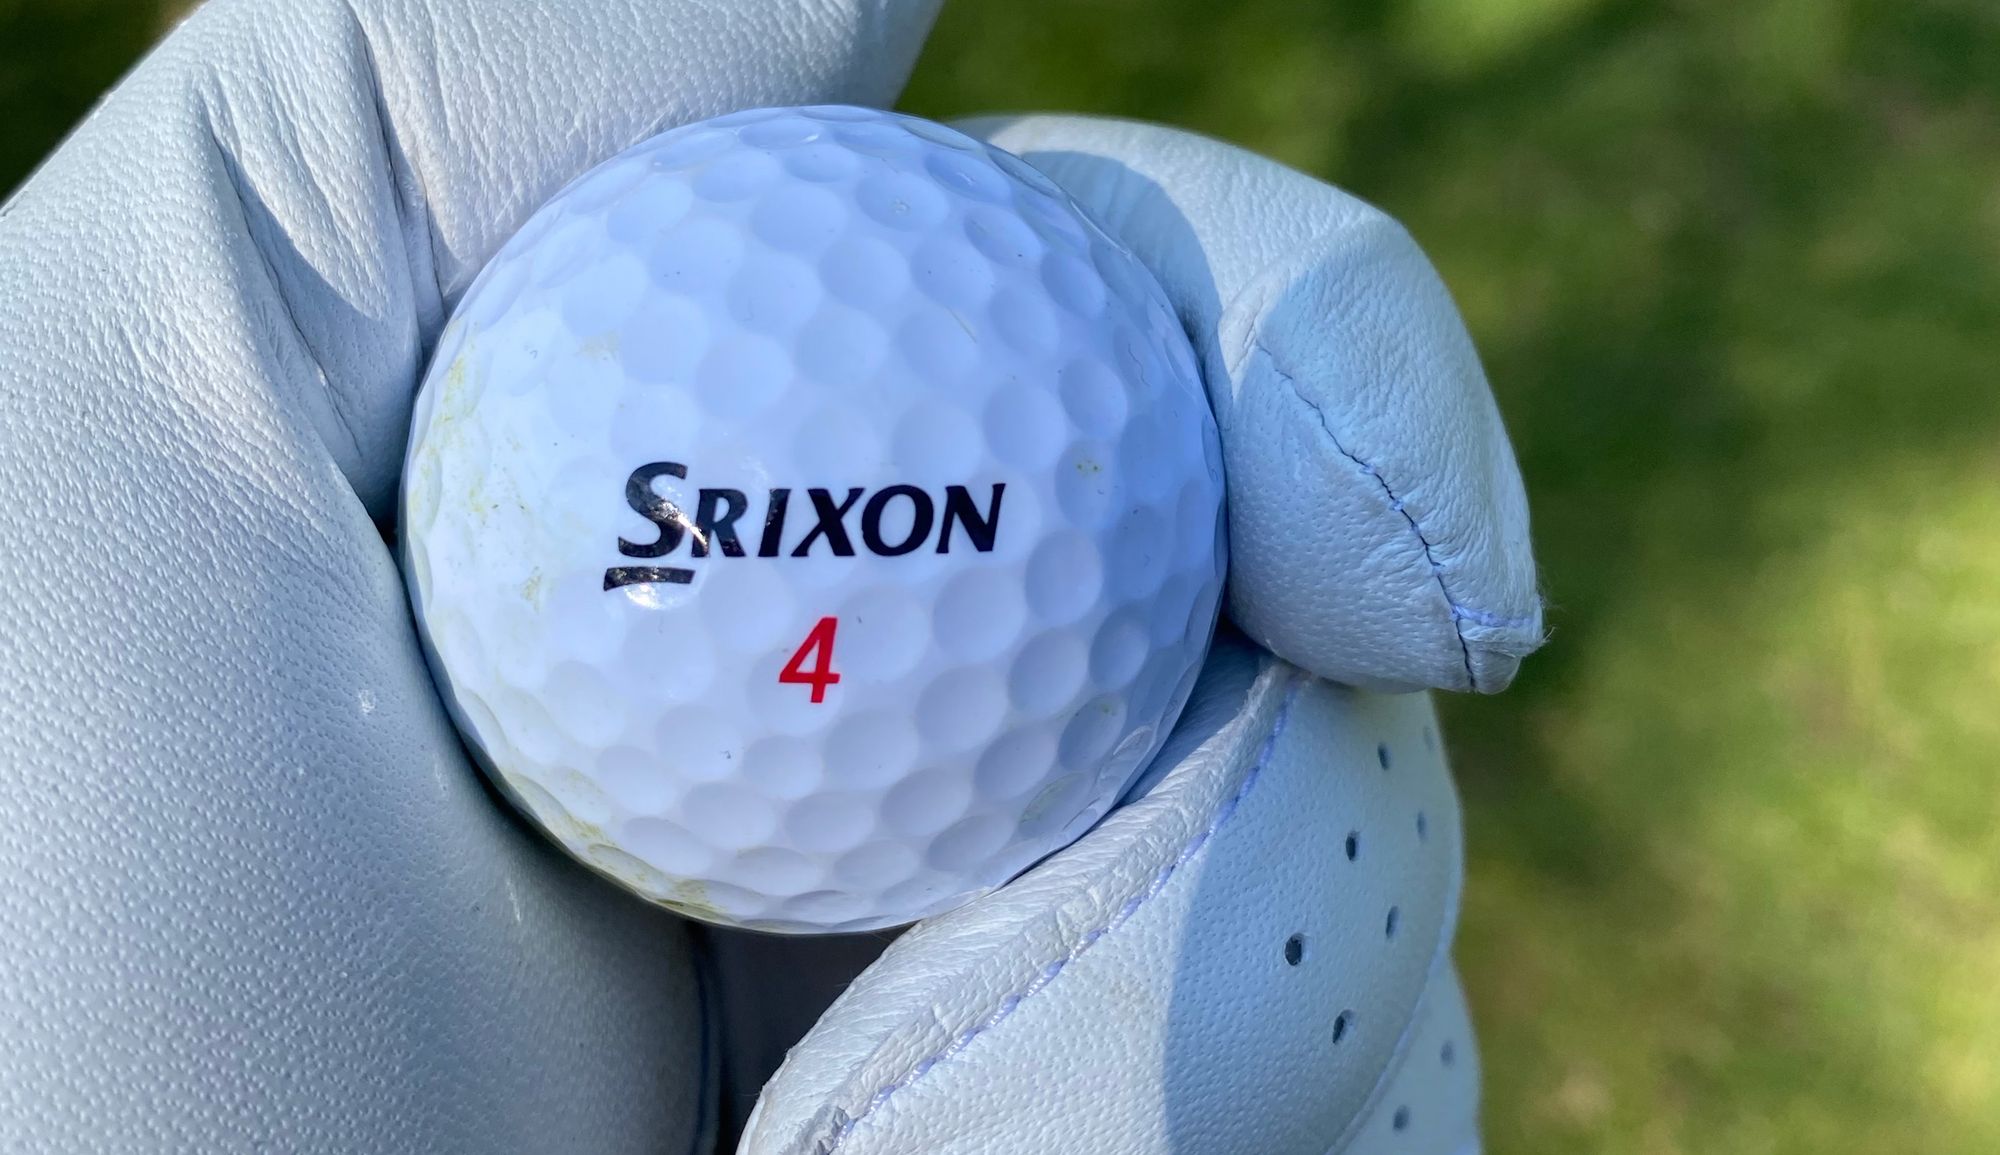 Srixon Distance balls deliver a more stable flight in any wind conditions.